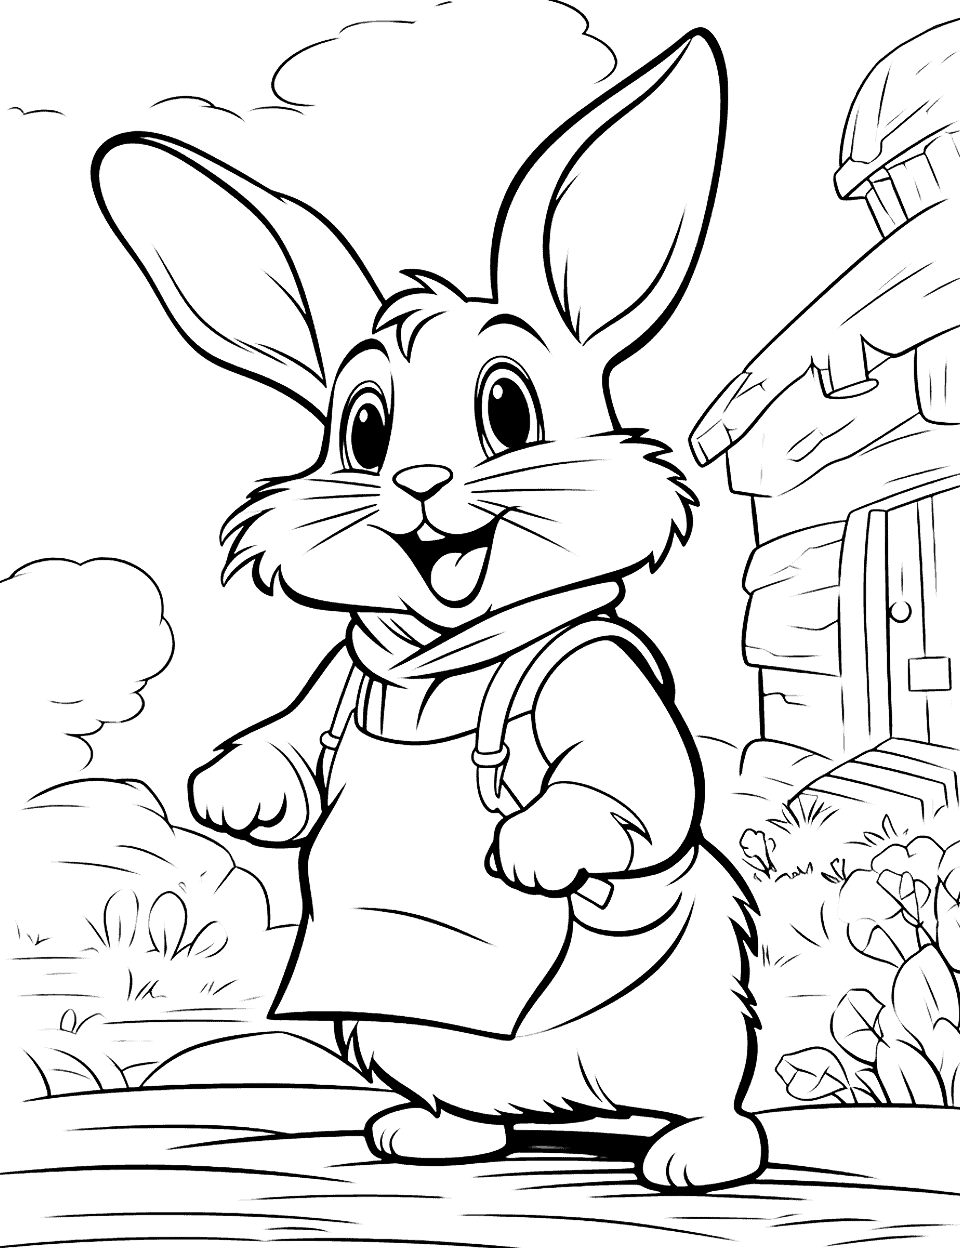 Bunny Adventure Coloring Page - A cheerful bunny adventuring through a classic town.